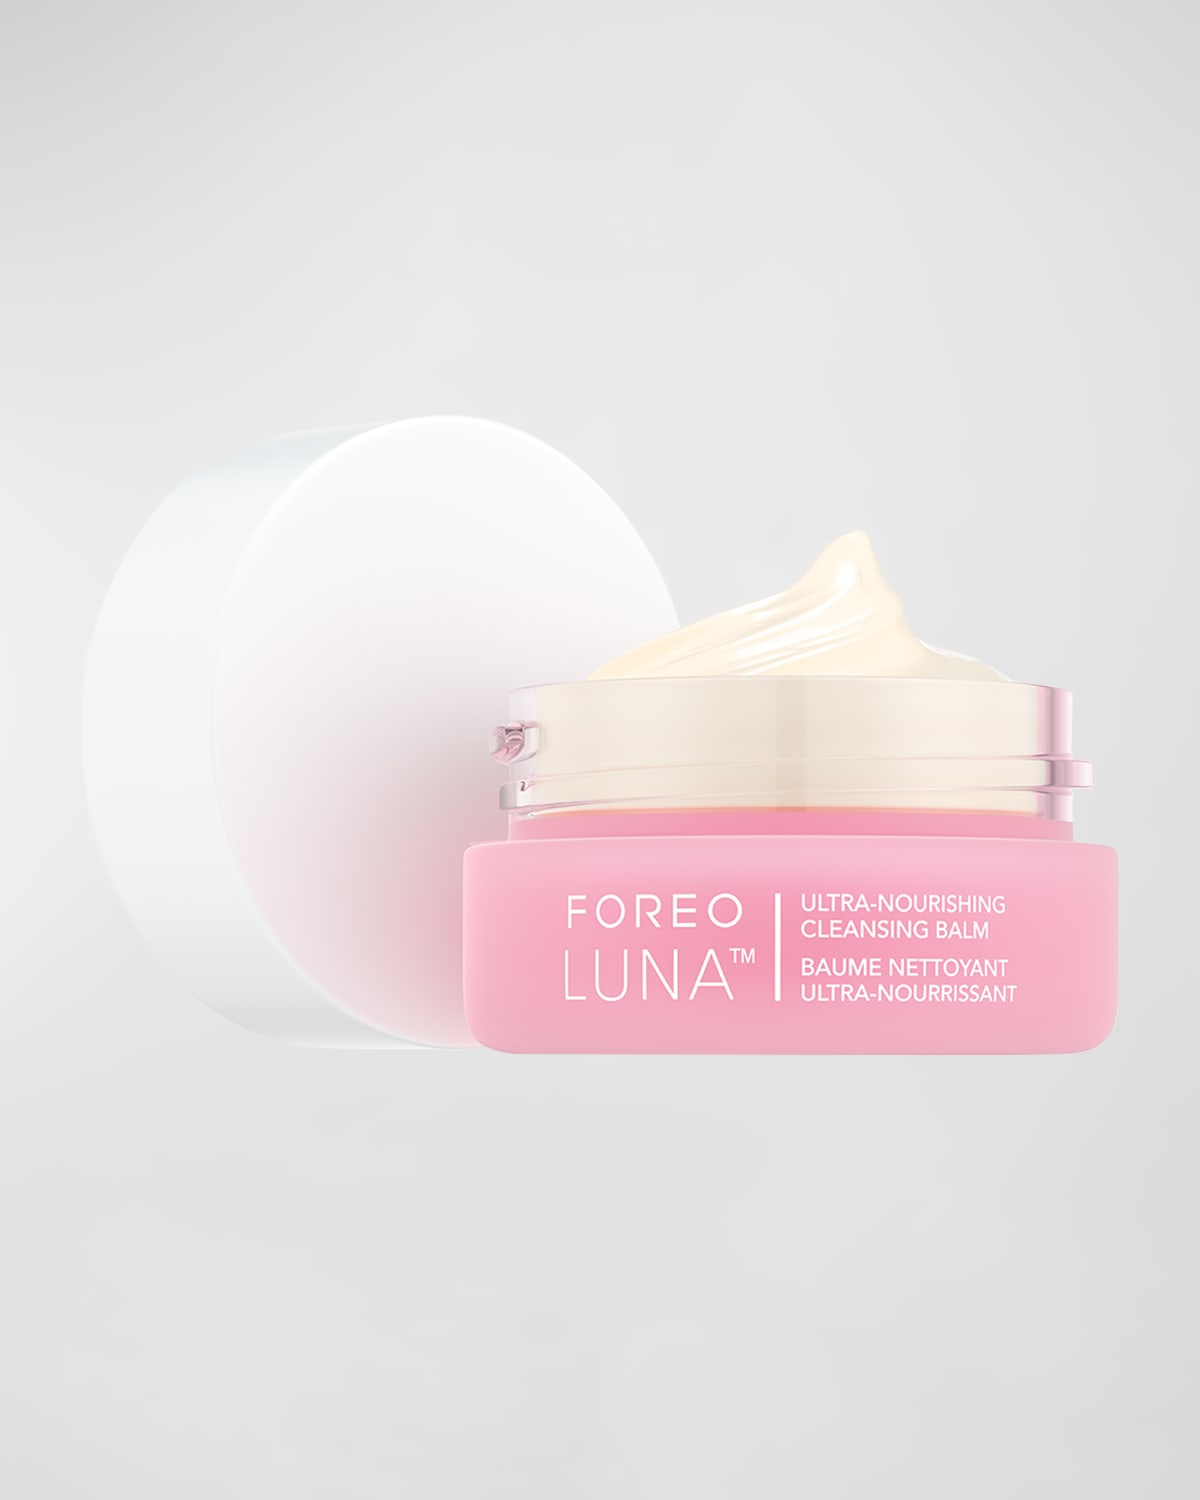 LUNA Ultra Nourishing Cleansing Balm, Yours with any $250 Foreo Order